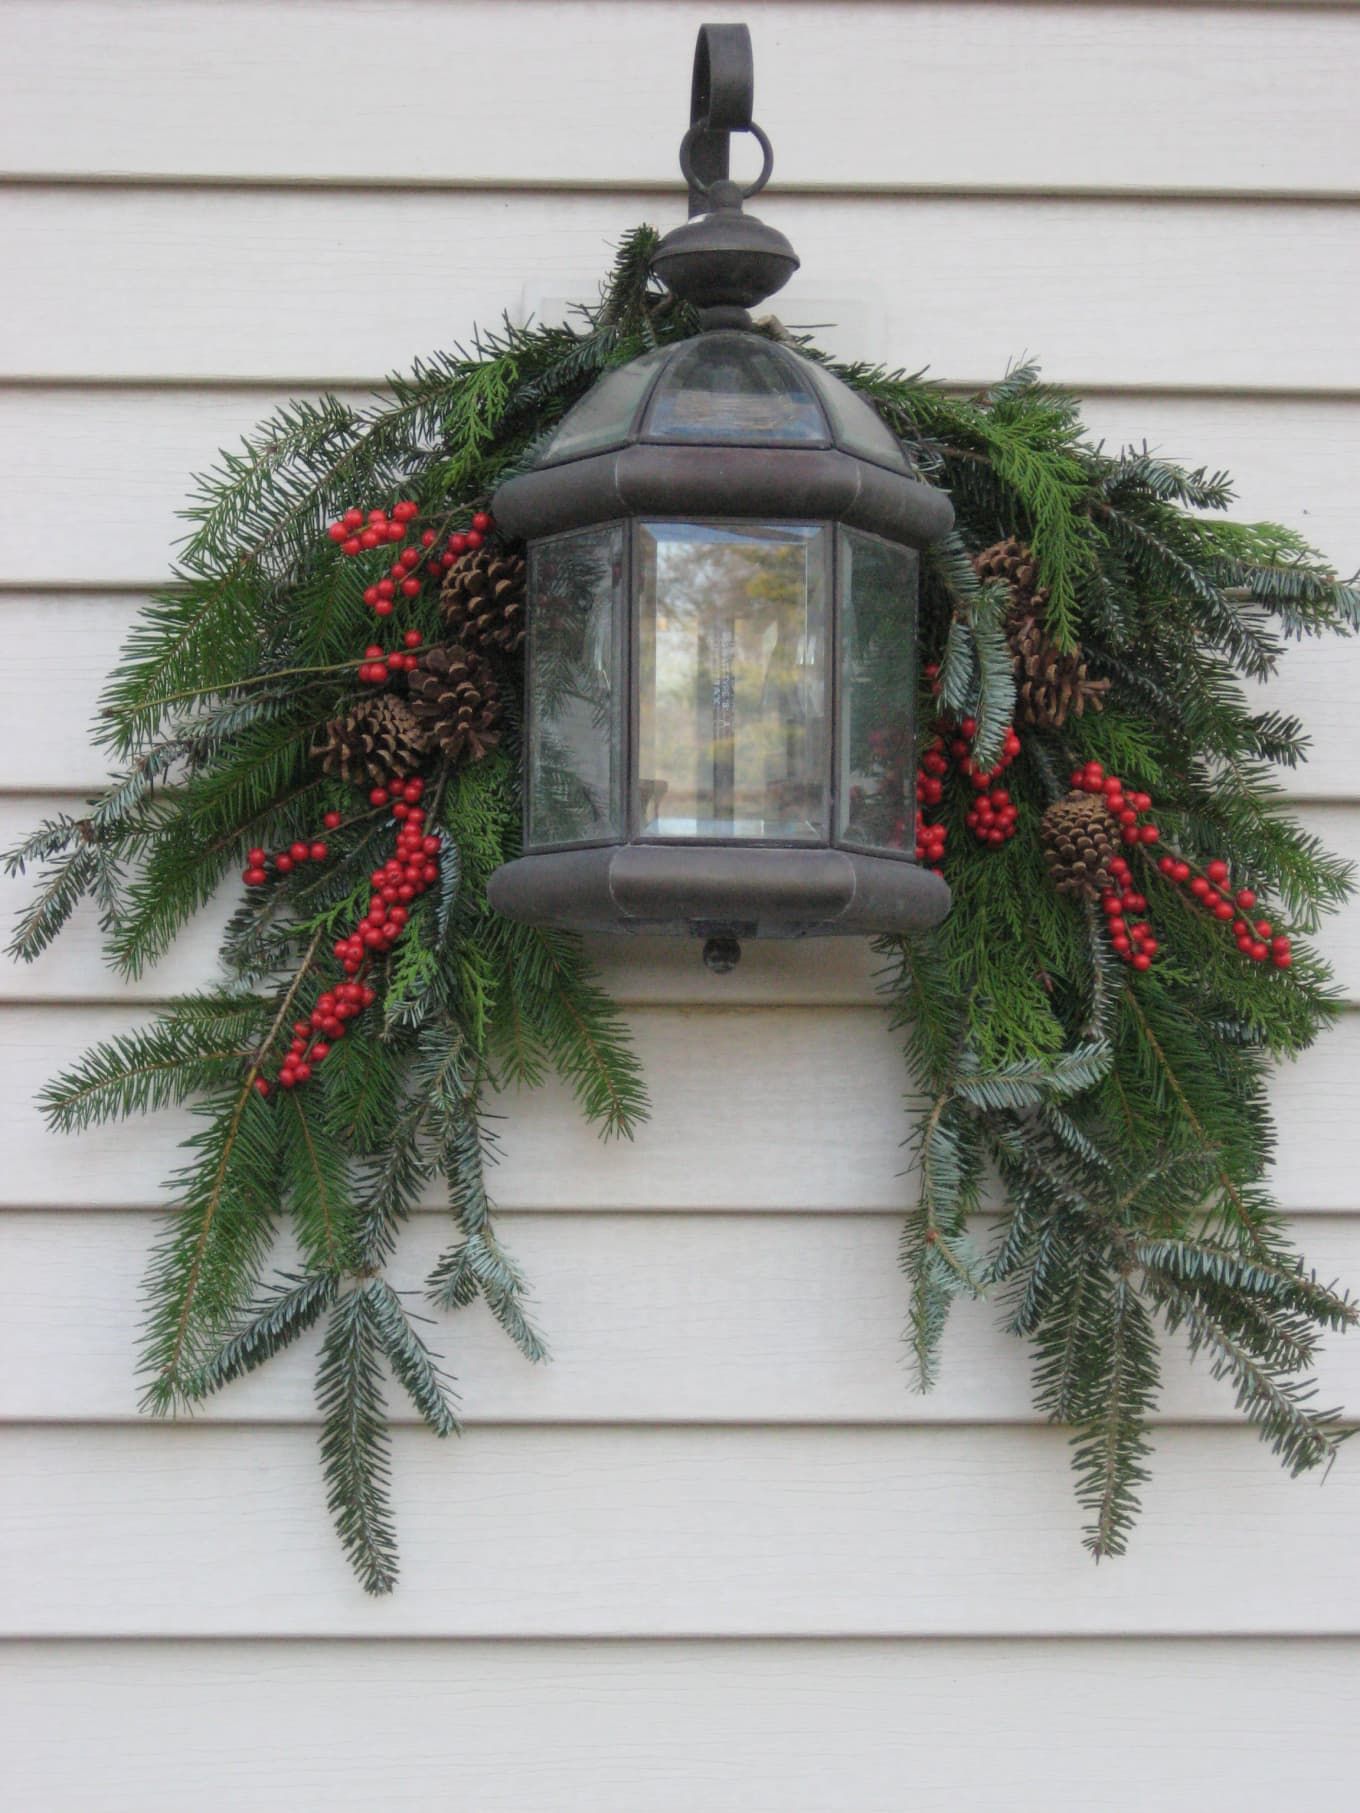 Festive Holiday Porch Decorations for a Merry Christmas